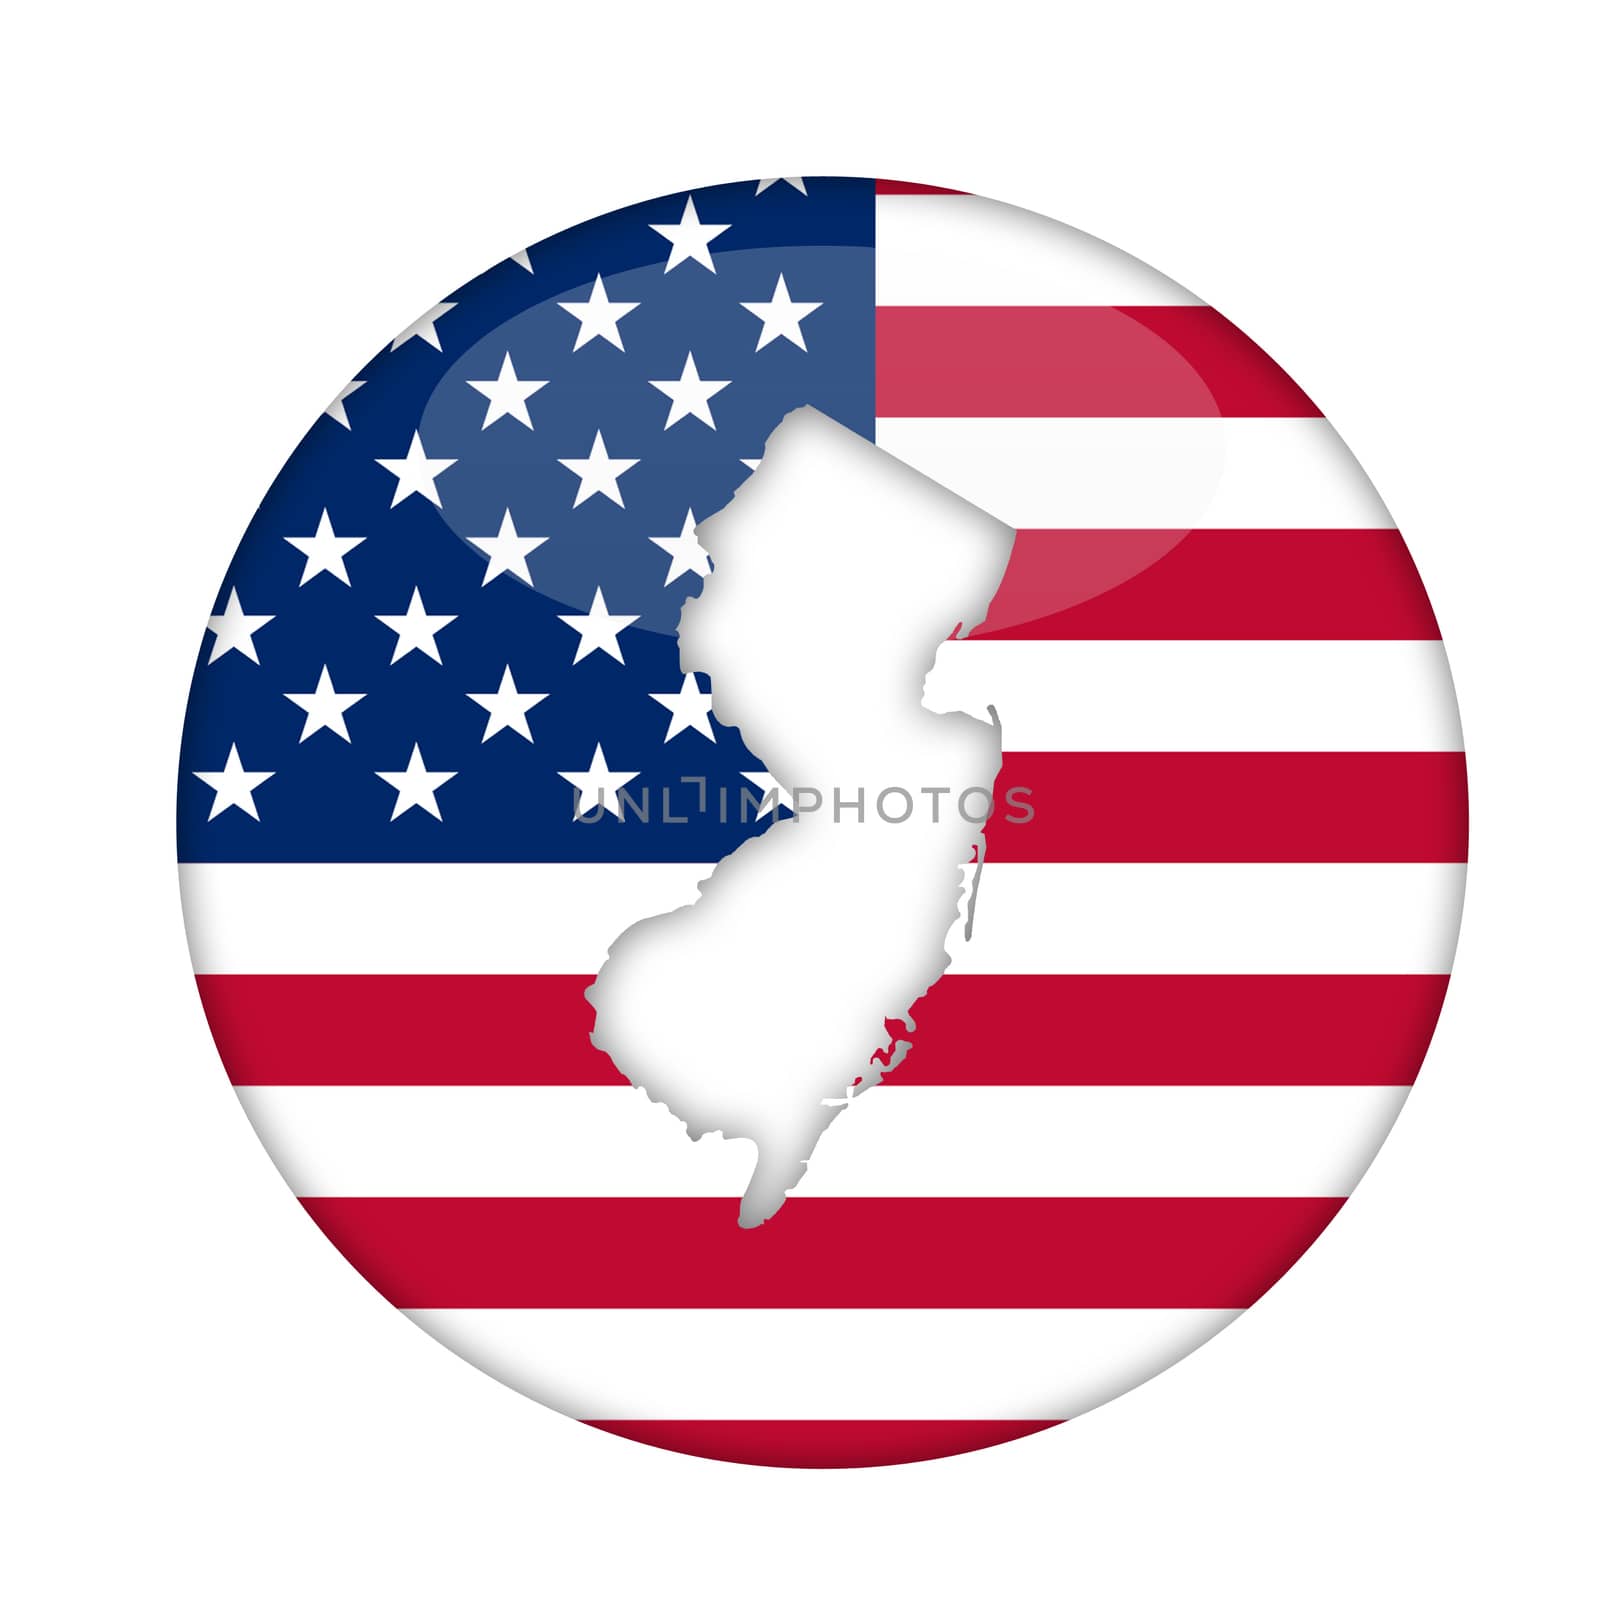 New Jersey state of America badge isolated on a white background.